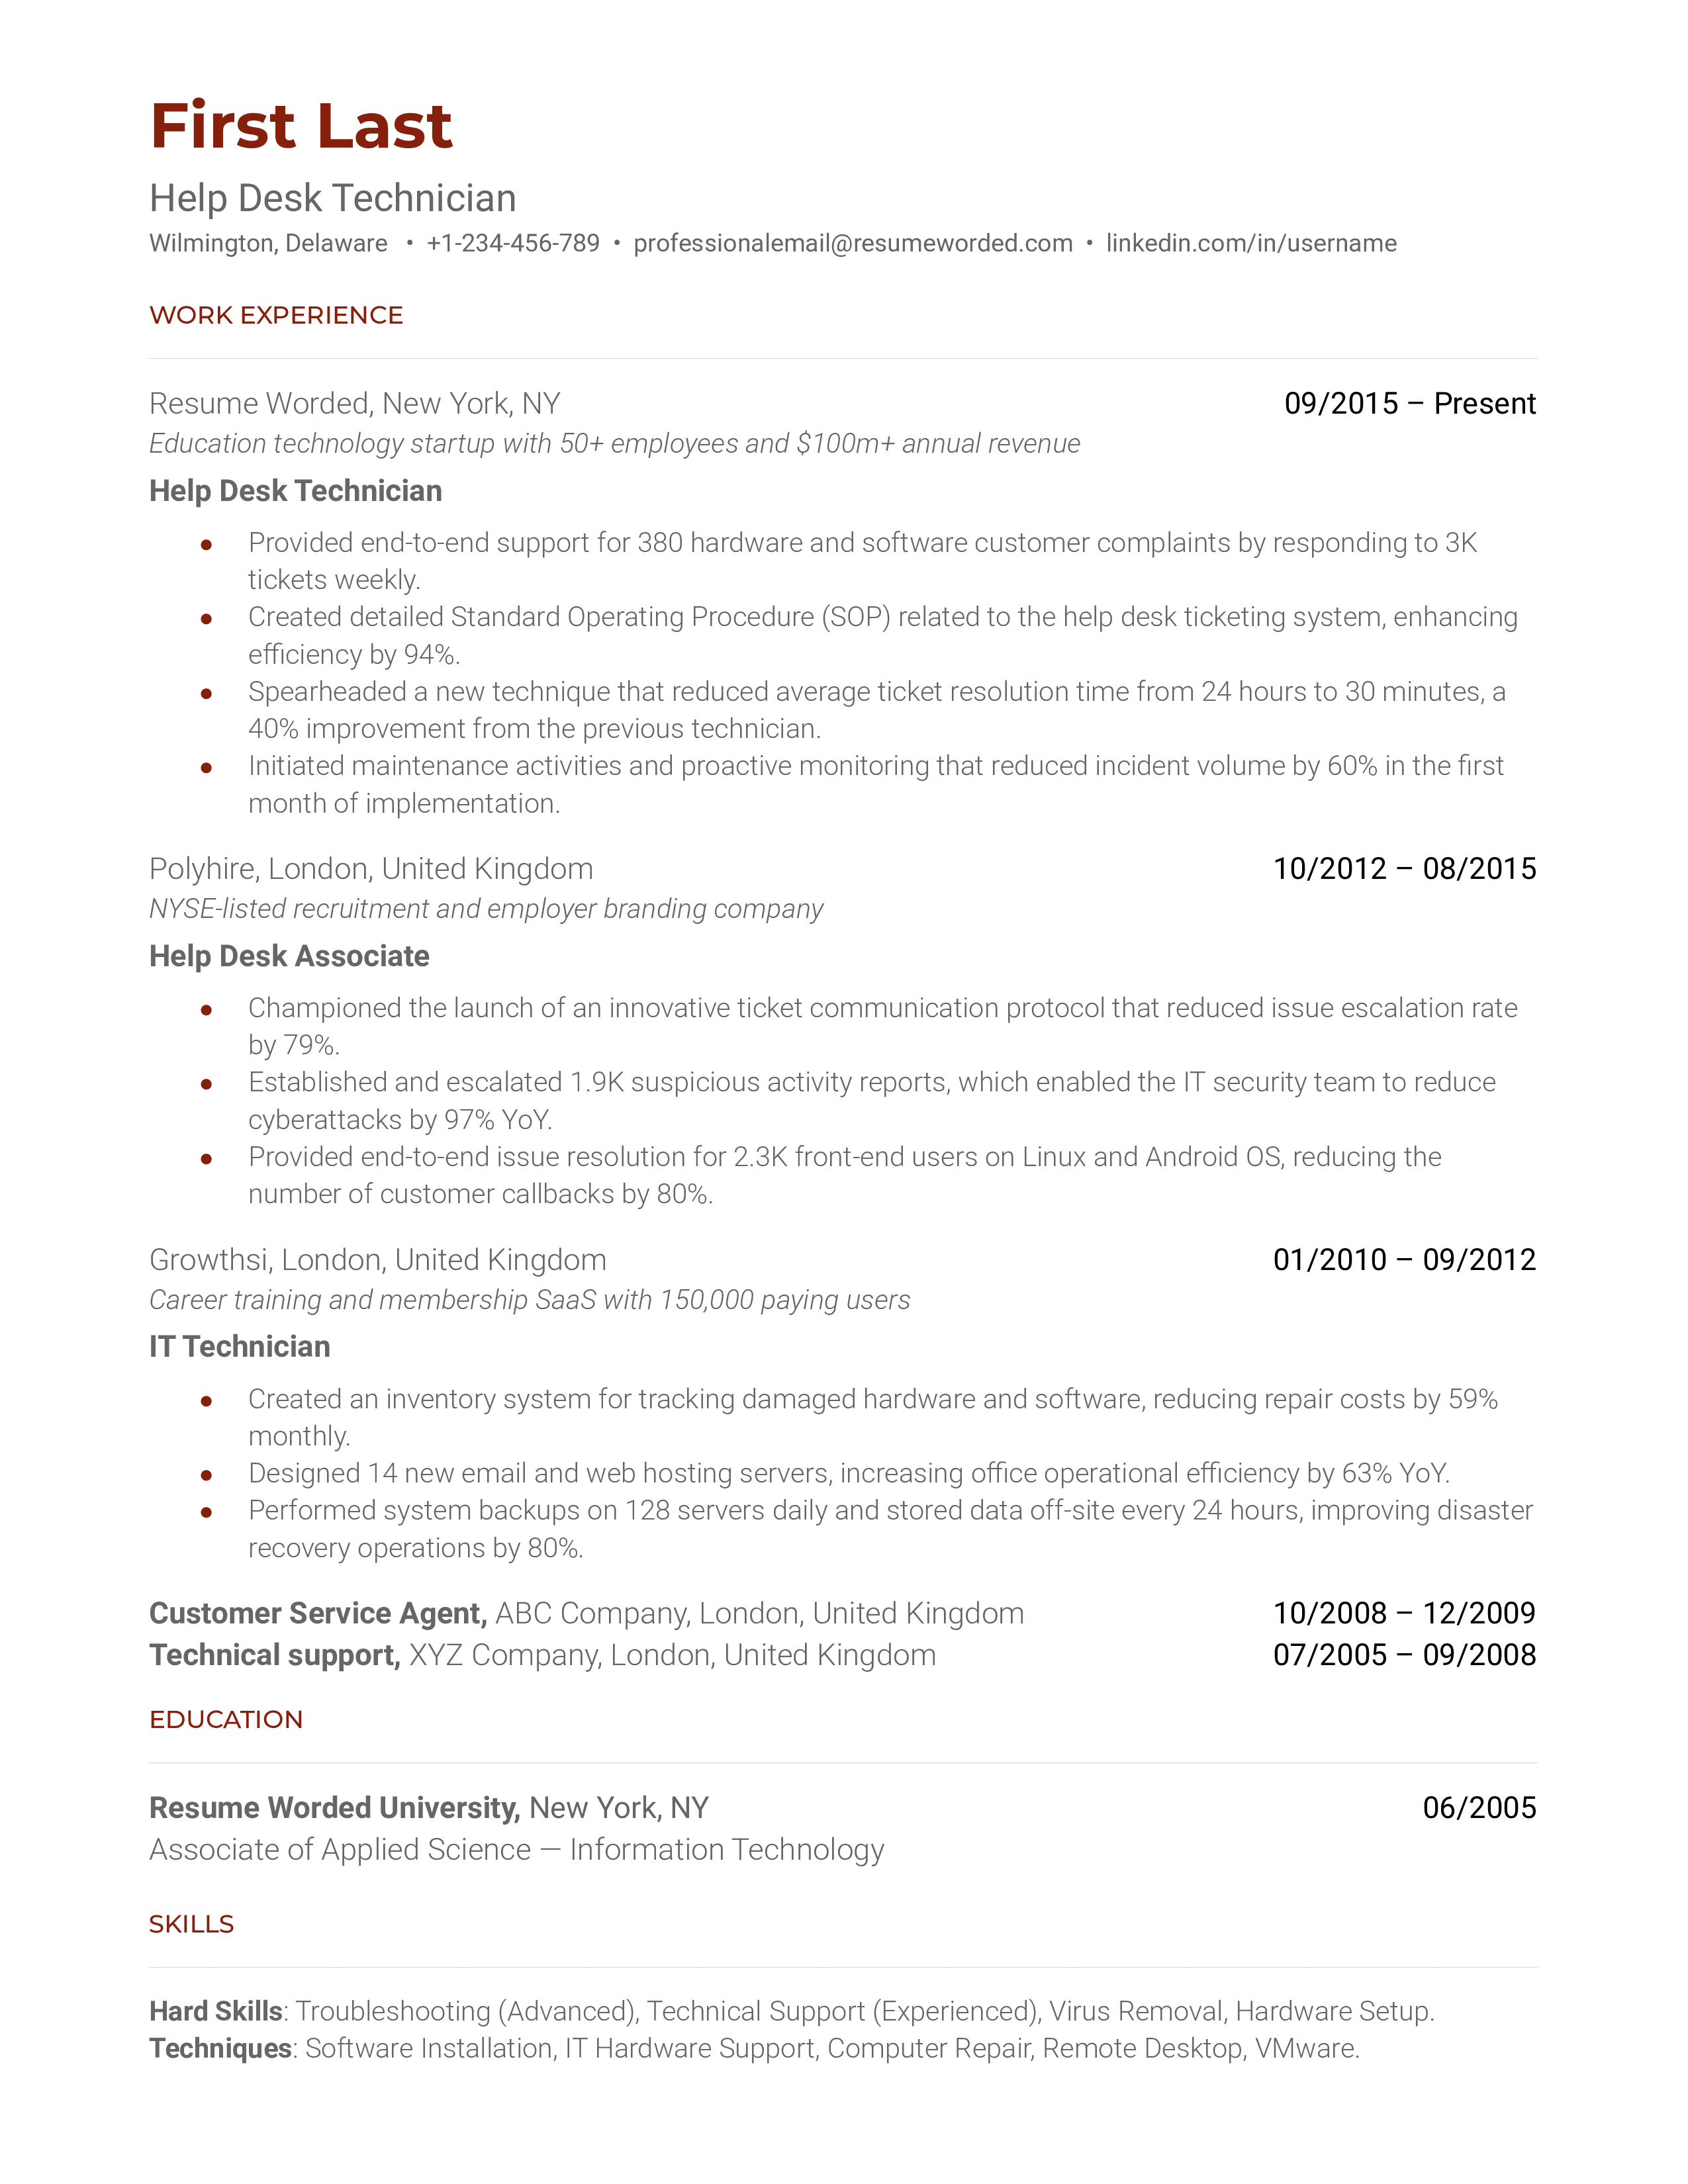 A help desk technician resume example that prioritizes work experience